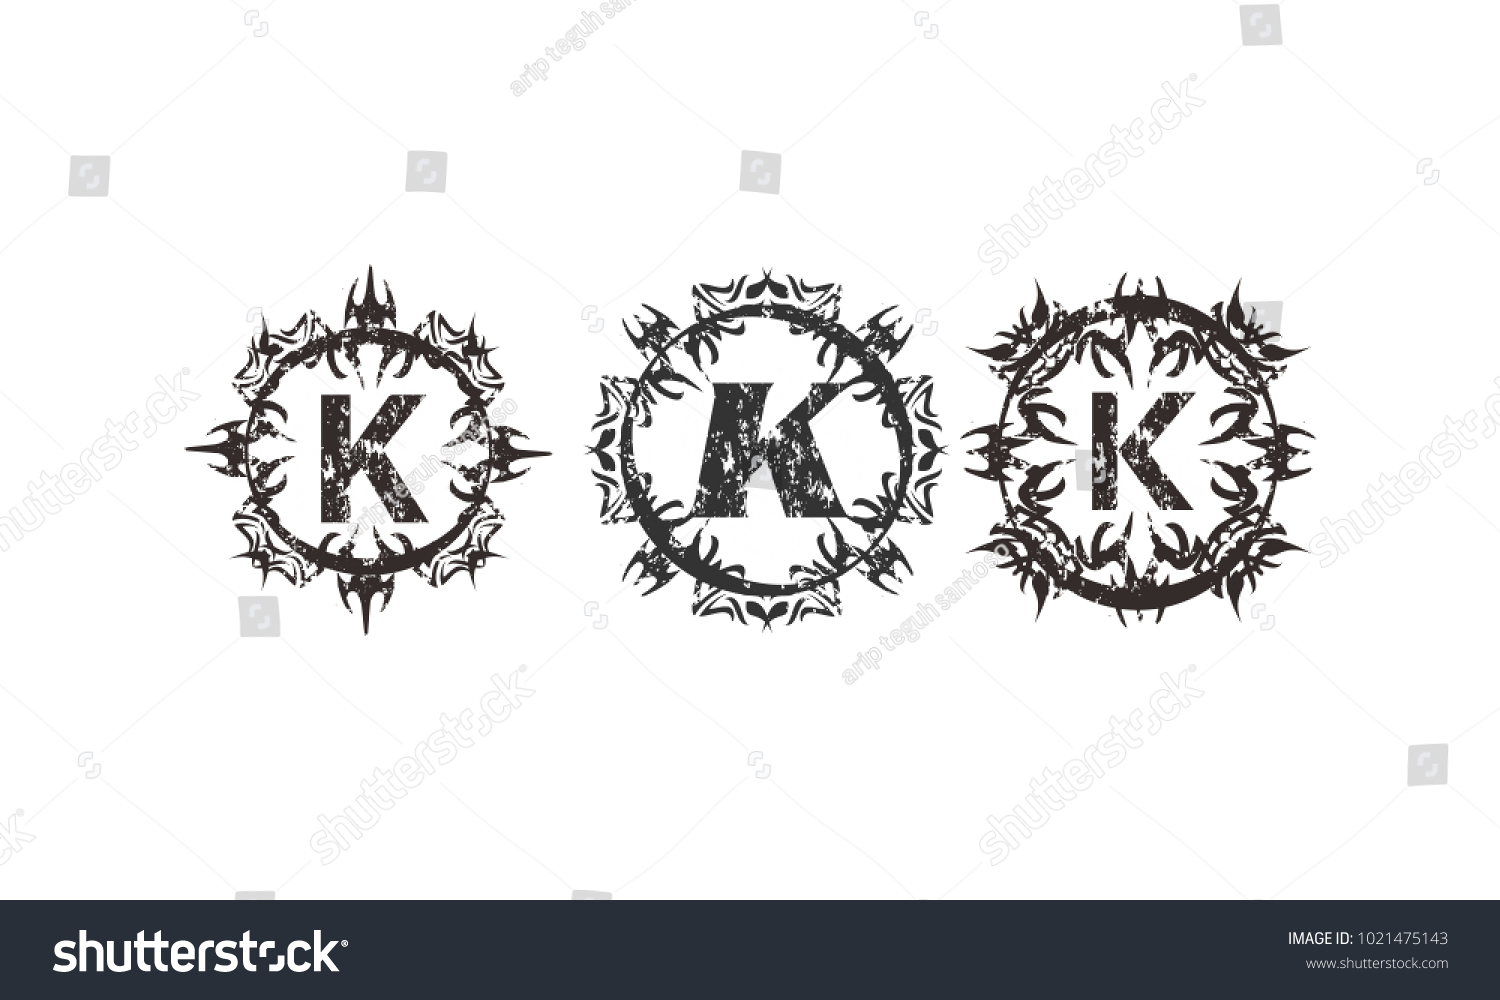 rough-letter-k-template-set-stock-vector-royalty-free-1021475143